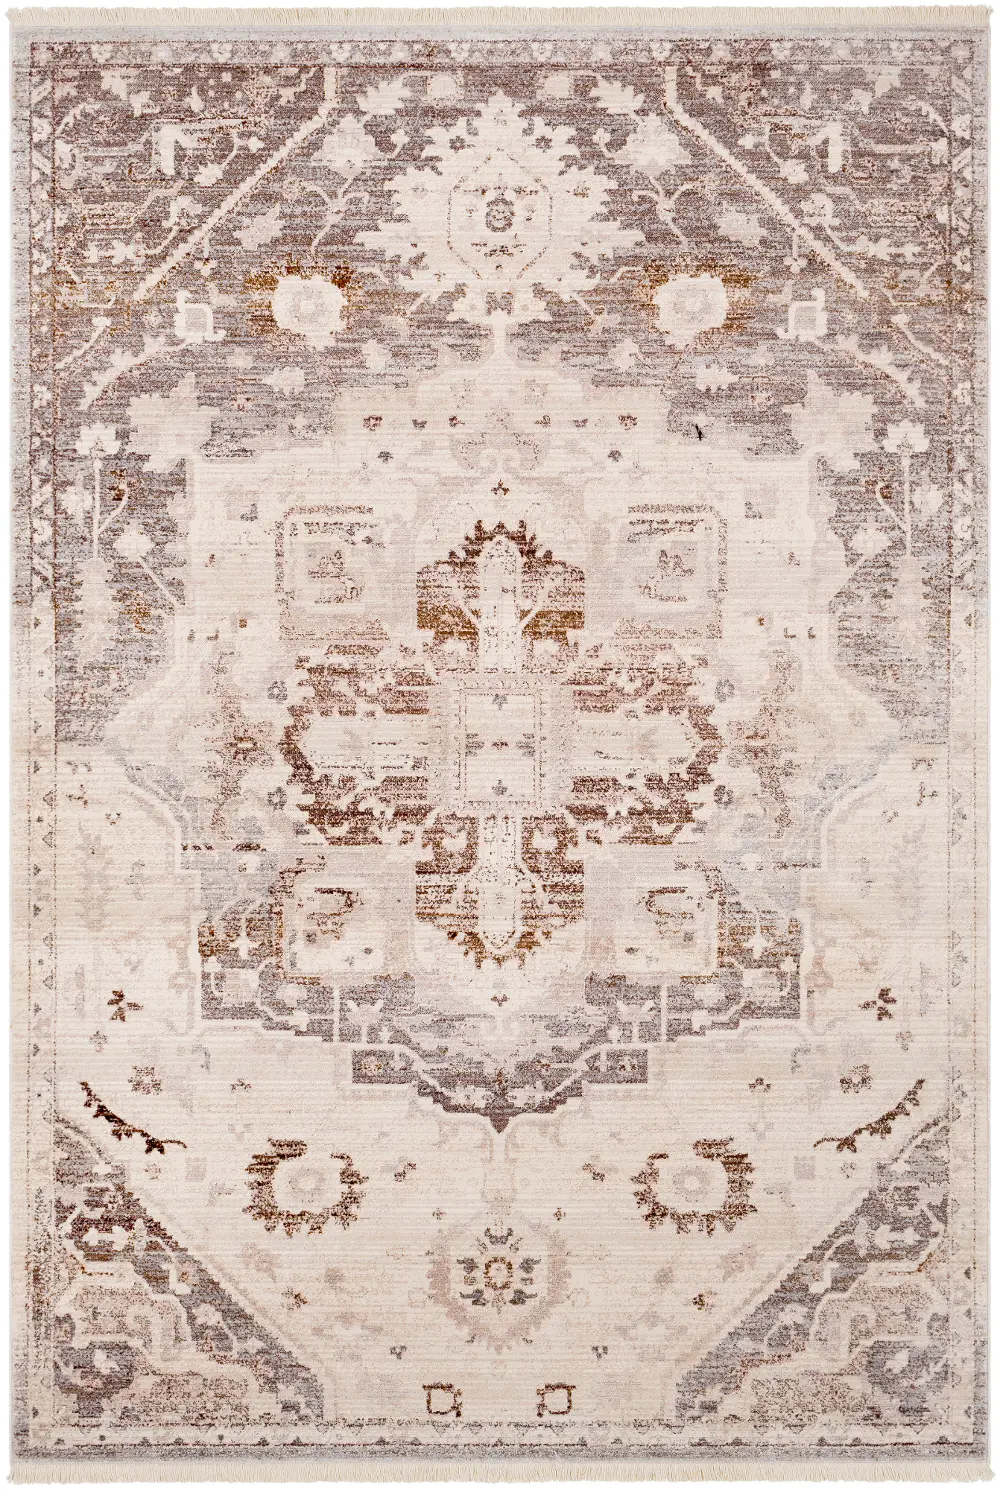 8 x 10 Large Beige, Brown and Gray Area Rug - Ephesians-1